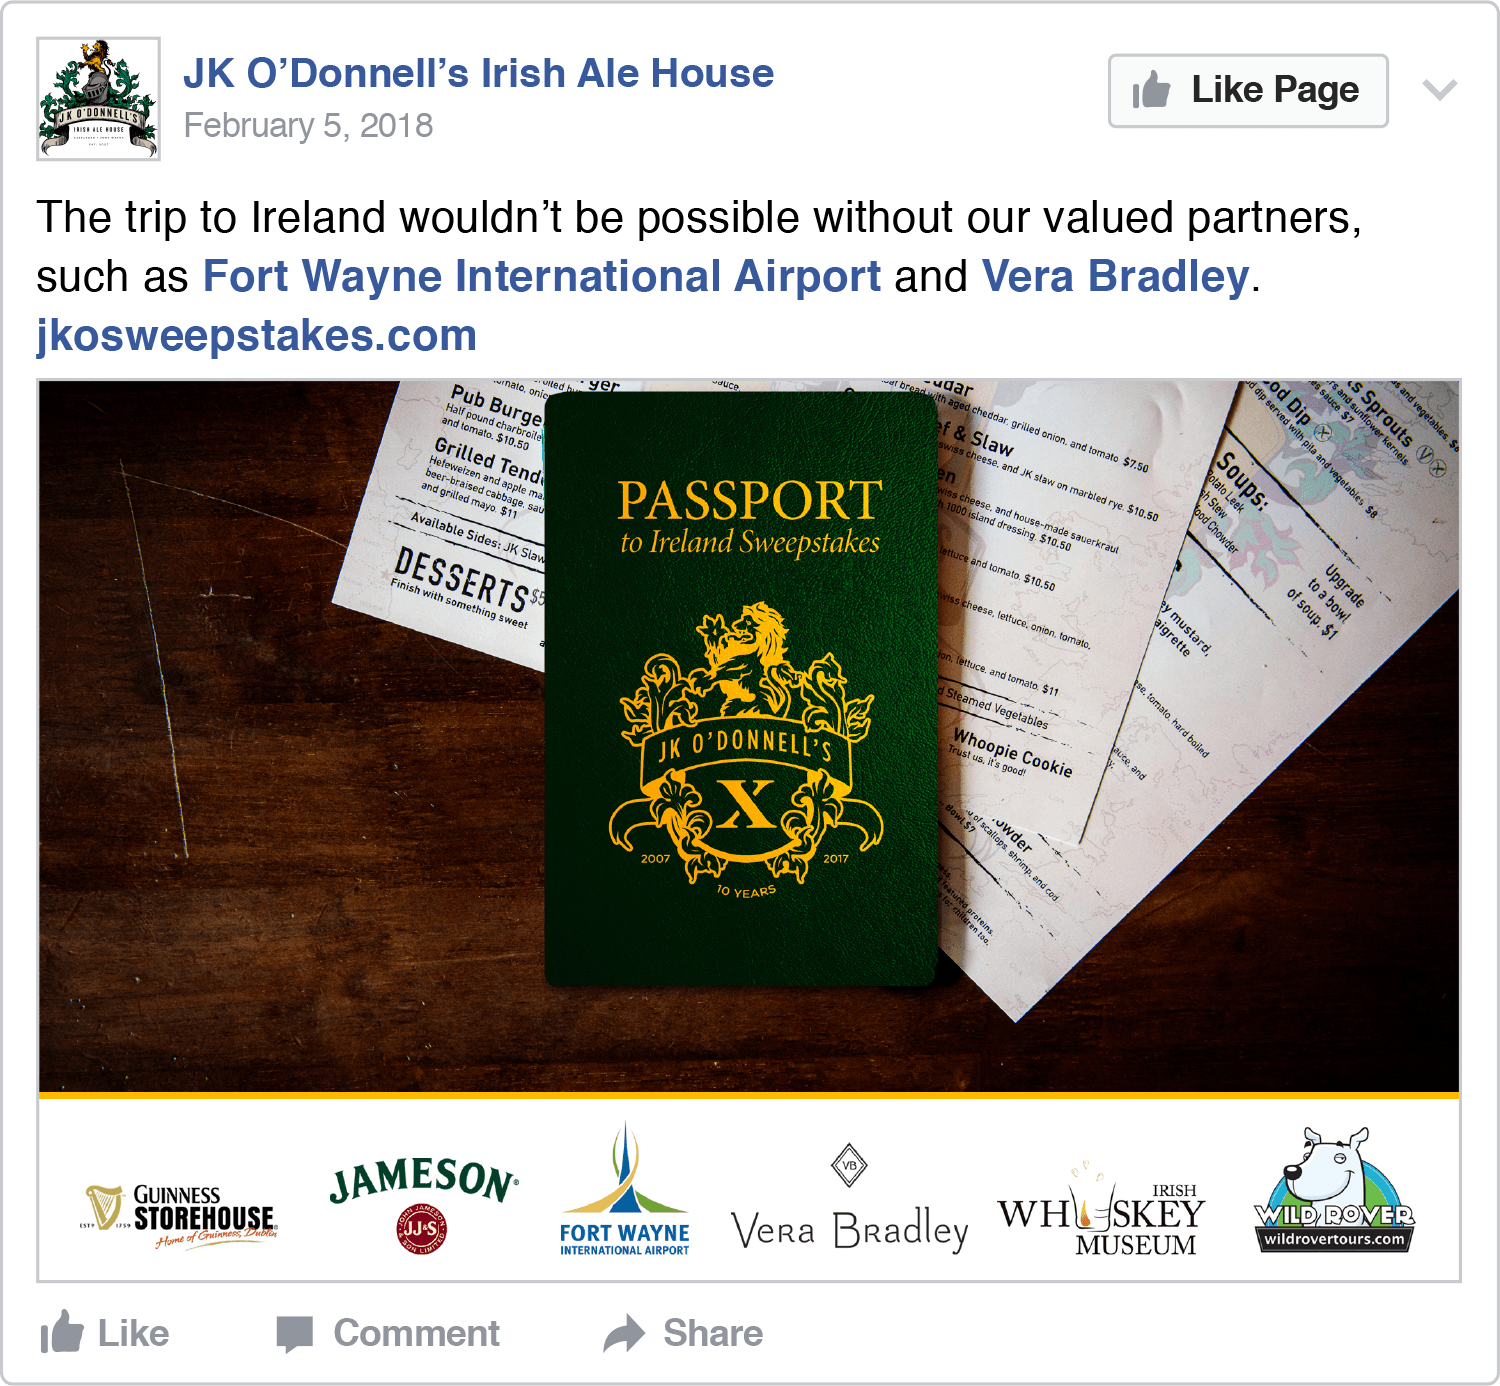 JK O'Donnell's, Passport to Ireland Sweepstakes Facebook Boosted Post